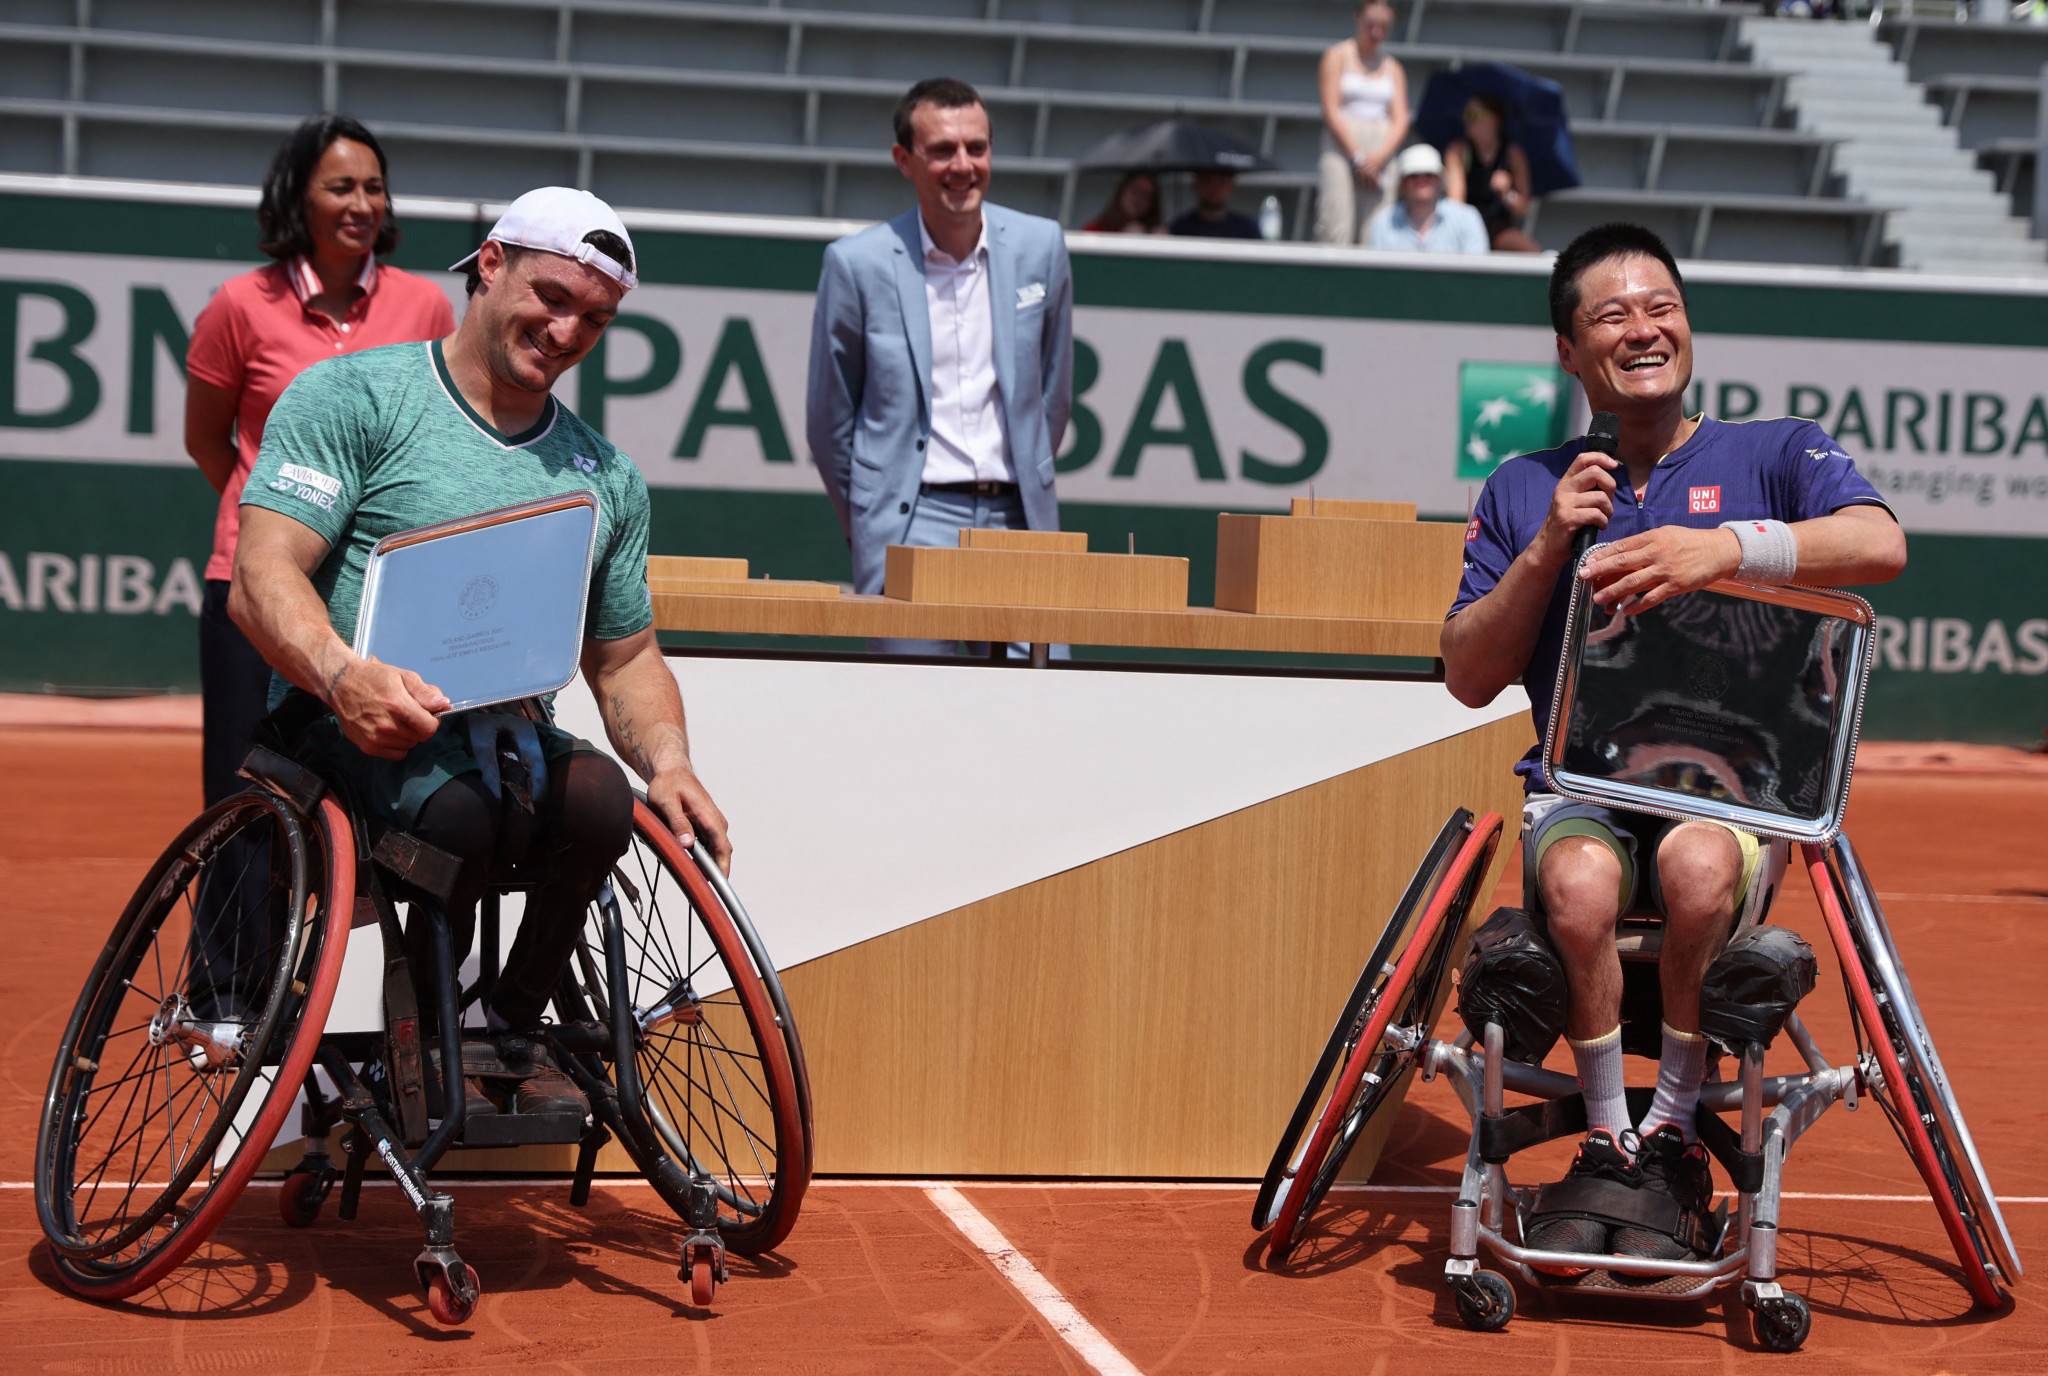 Japan's three-time Paralympic singles champion Shingo Kunieda won at Roland Garros for the first time since 2018 ©Getty Images